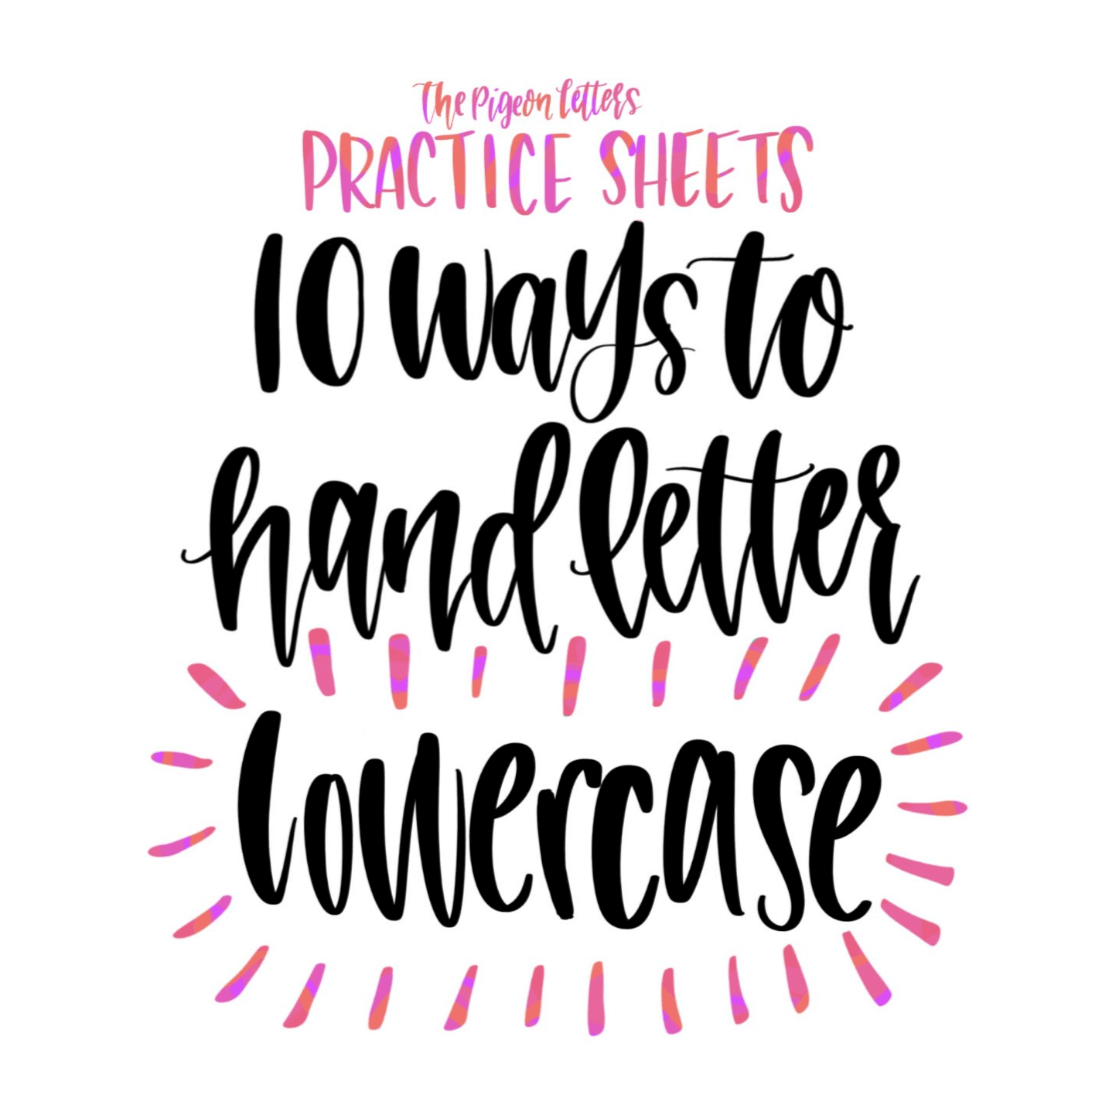 practice sheets for handlettering